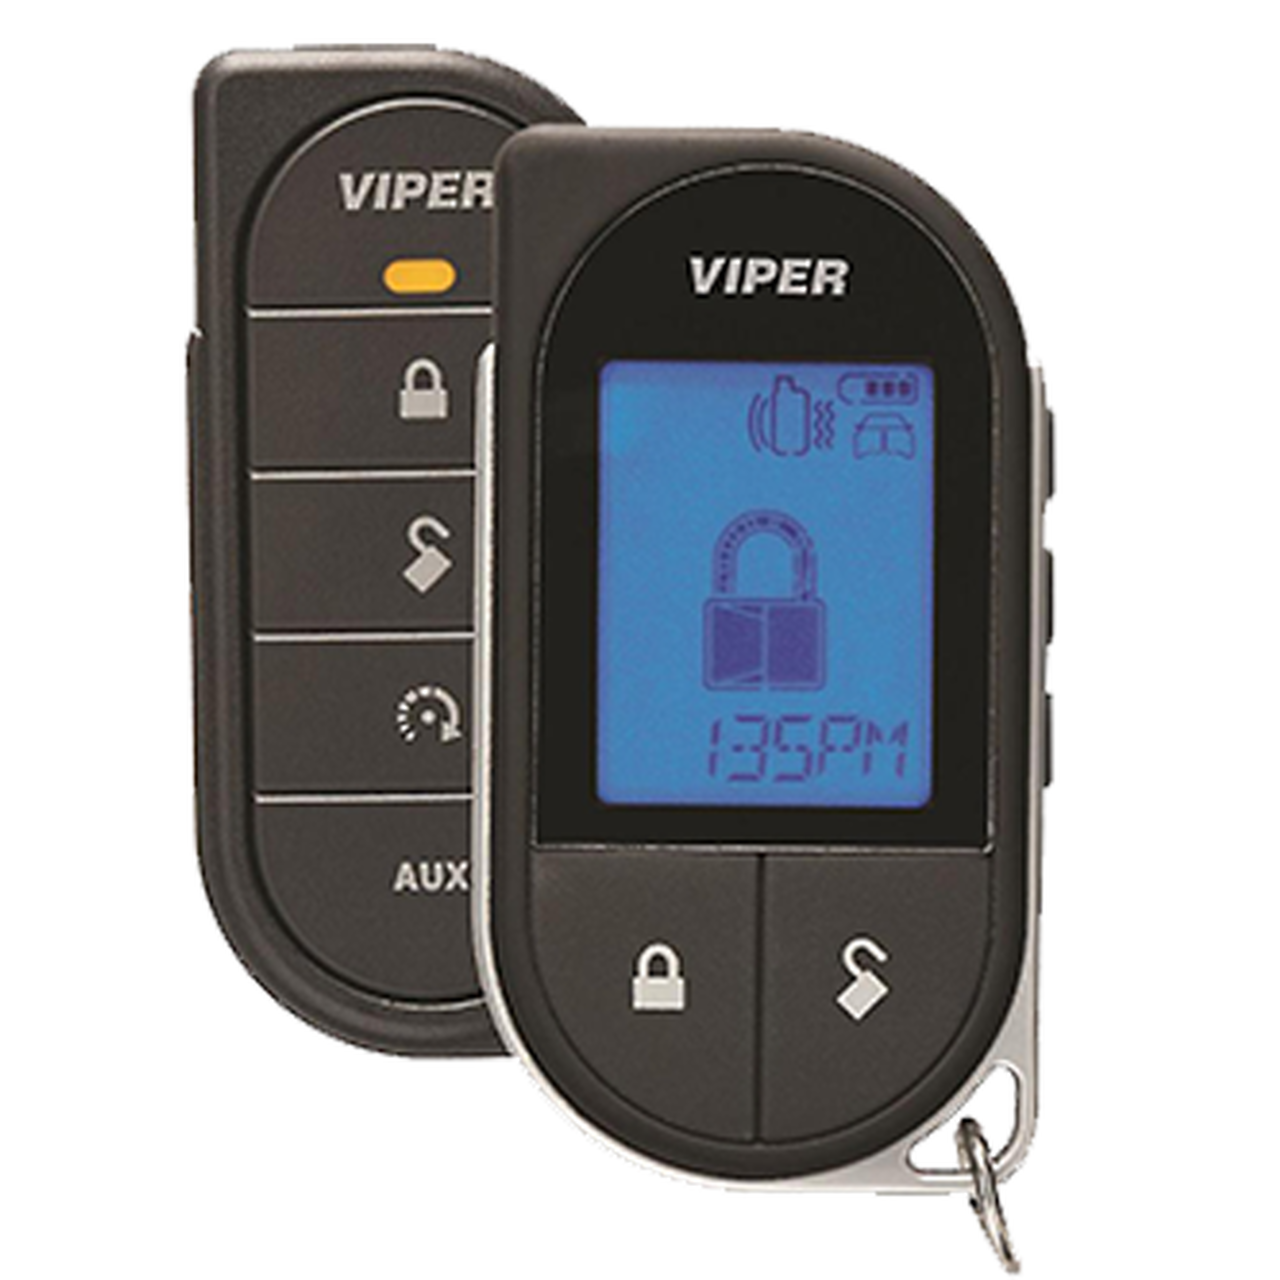 2-Way Car Security with Remote Start System Viper 5706V With 2 Door Locks :  Amazon.co.uk: Automotive